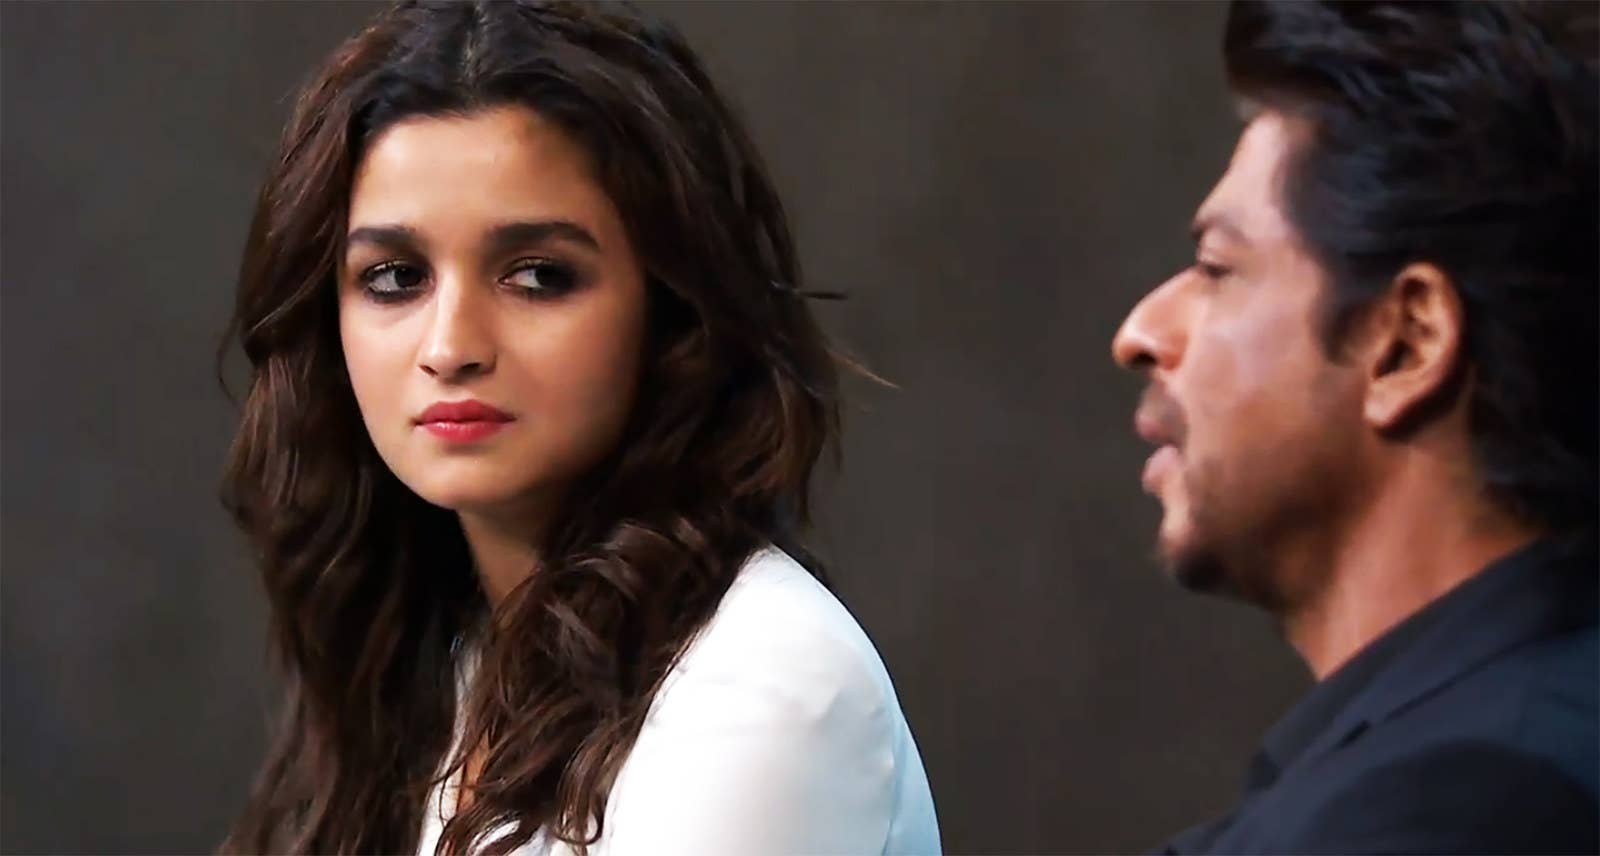 Alia Sexy Xxx - Alia Bhatt Is An Incredible Actor, But Her Real Skill Is Decision-Making